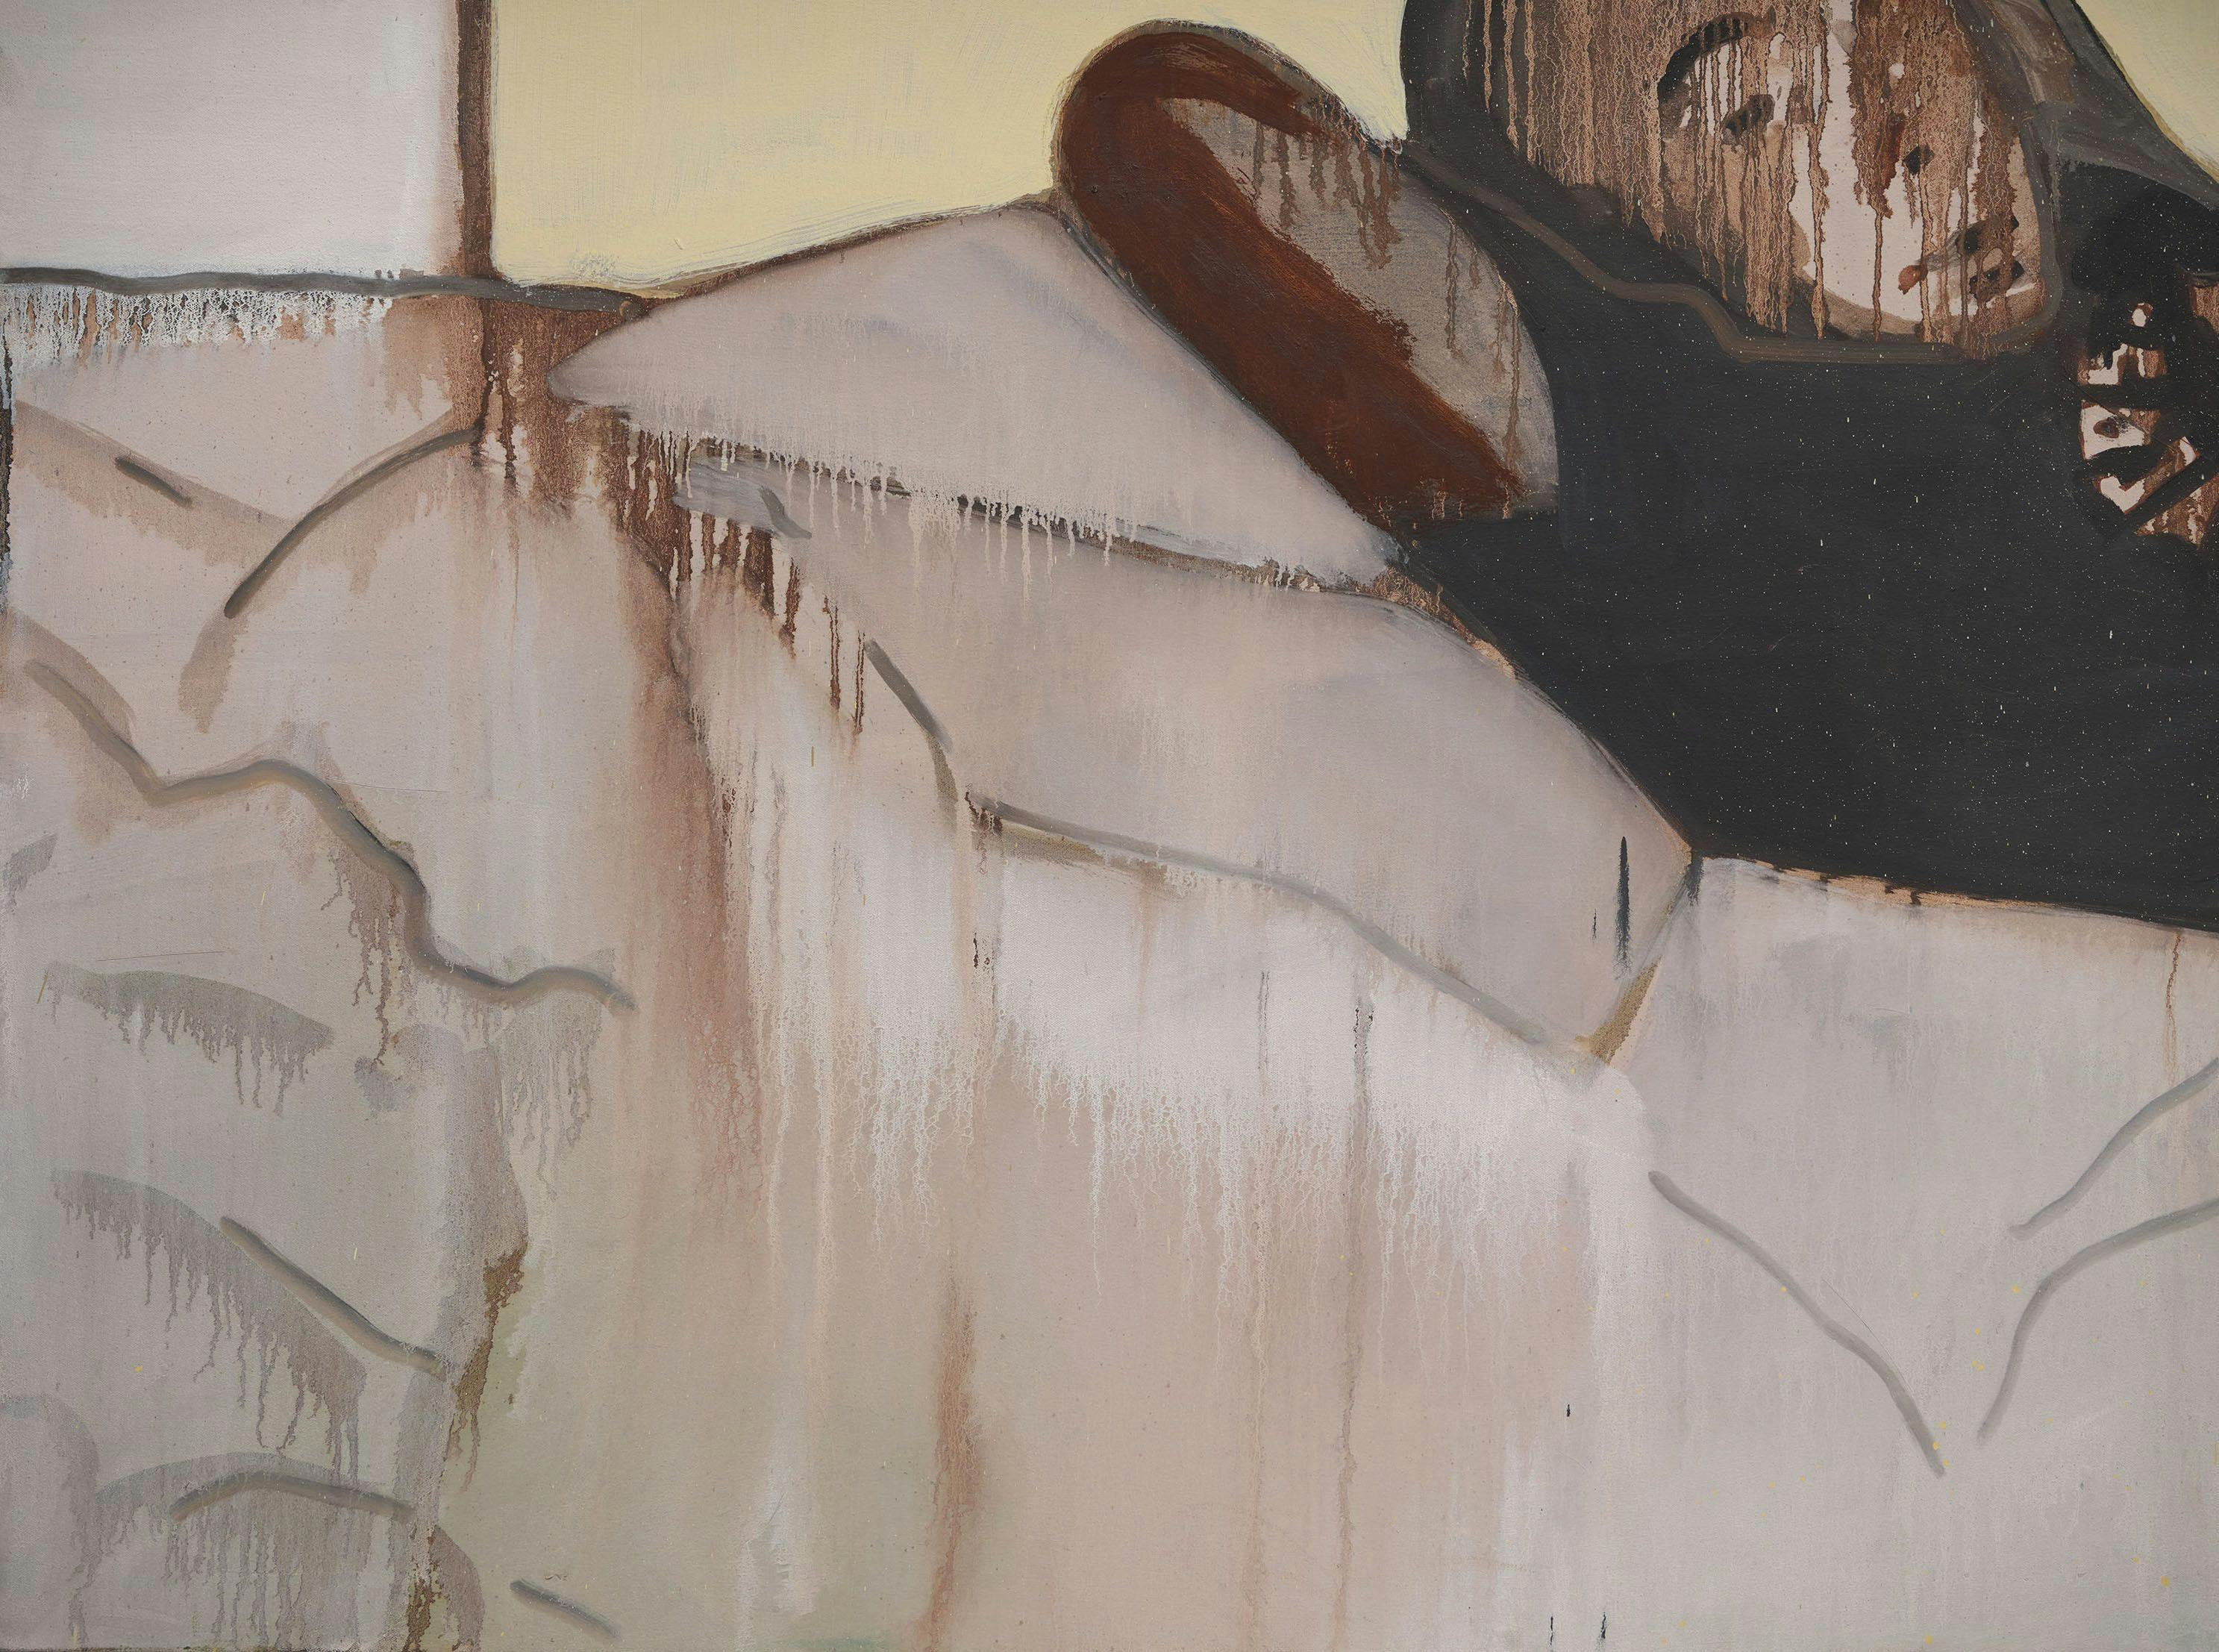 A detail from an untitled painting by Noah Davis, dated 2015.